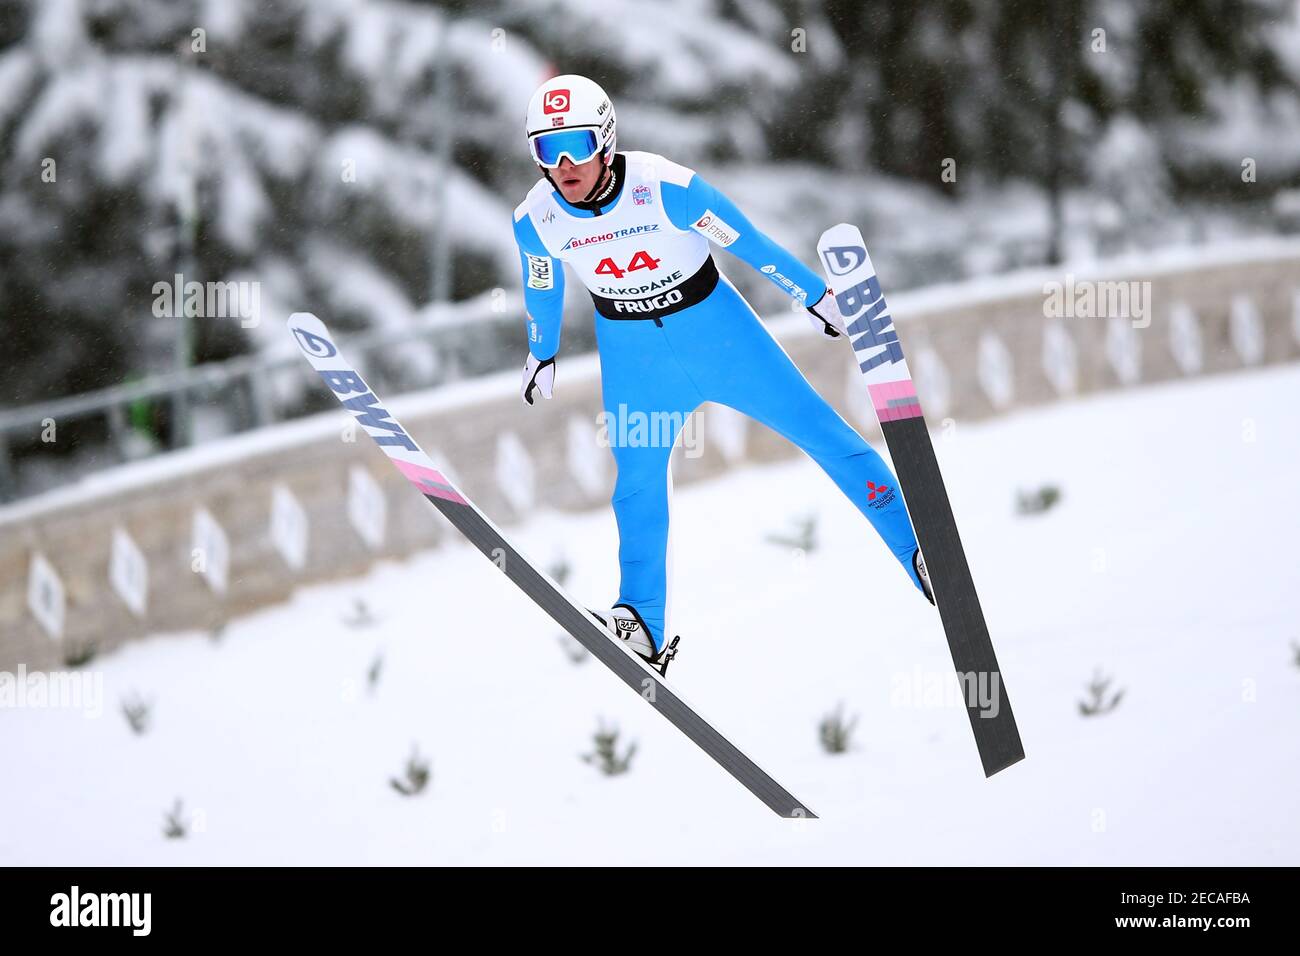 Zakopane, Poland. 13th Feb, 2021. Andre Daniel ski jumping on The Great Krokiew Ski Jumping facility during the Ski Jumping World Cup competition in Zakopane. Credit: SOPA Images Limited/Alamy Live News Stock Photo